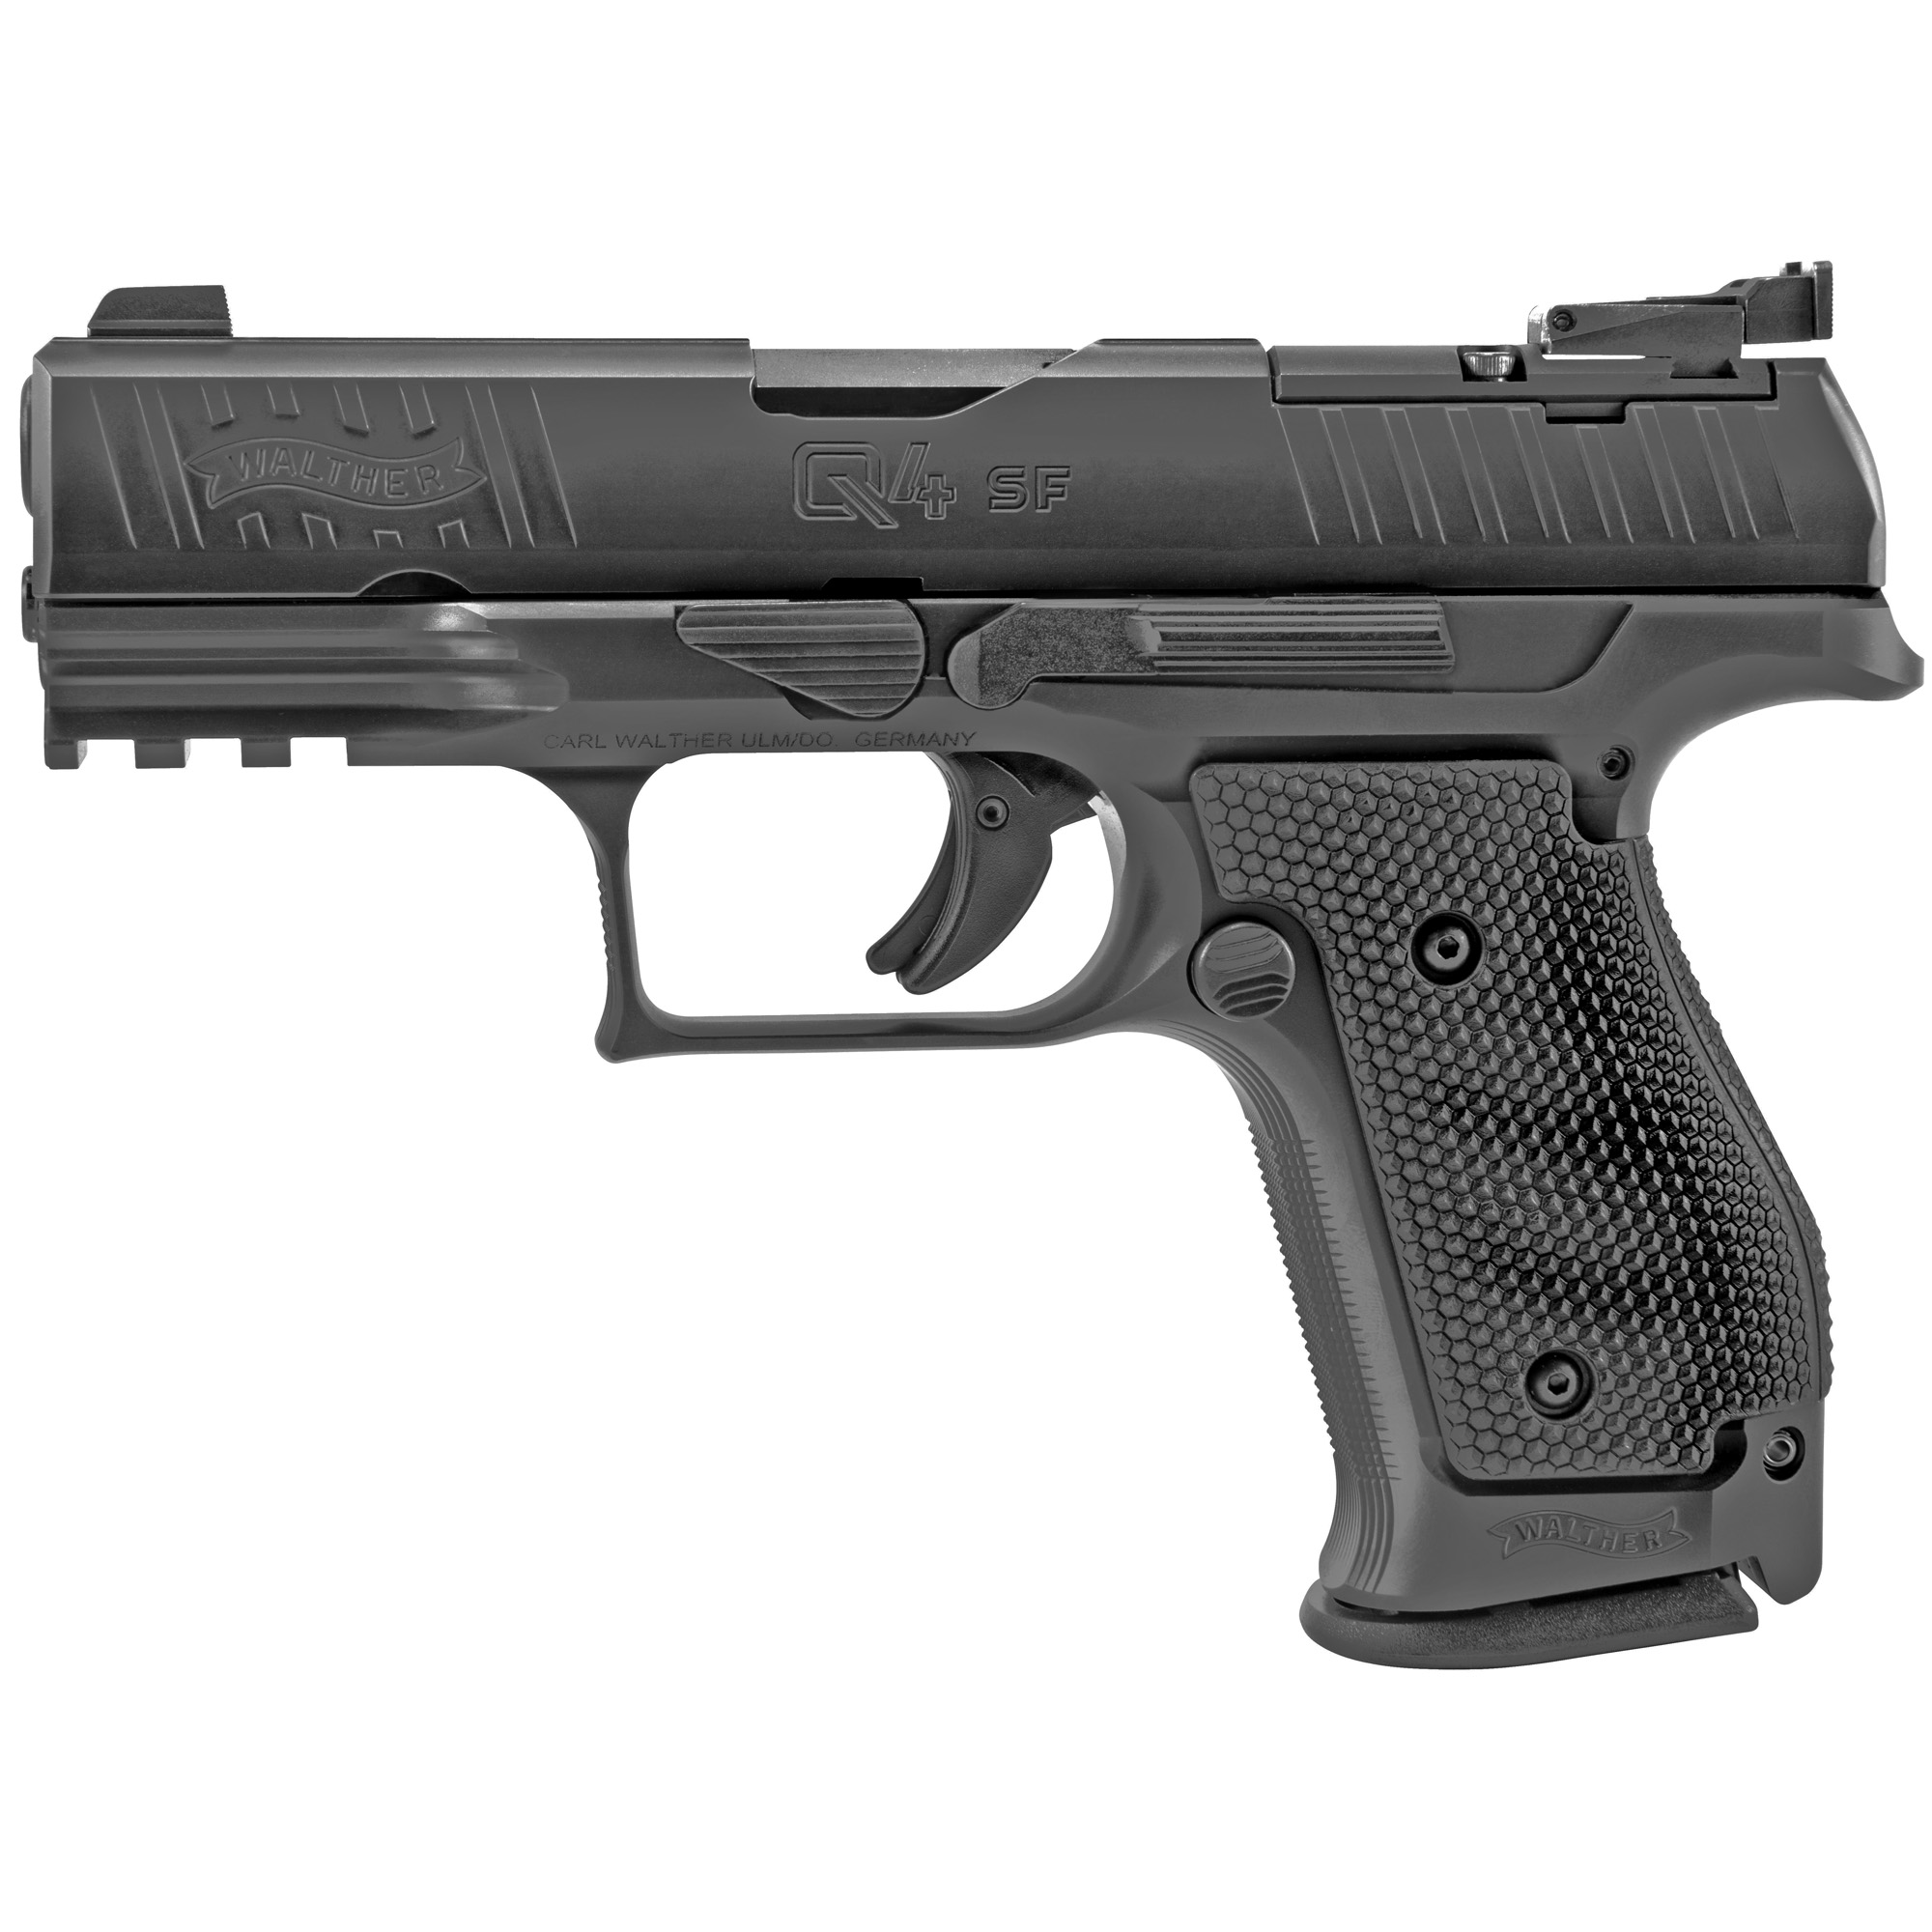 WALTHER Q4 SF OPTIC RDY 9MM 4 15RD 3MAG